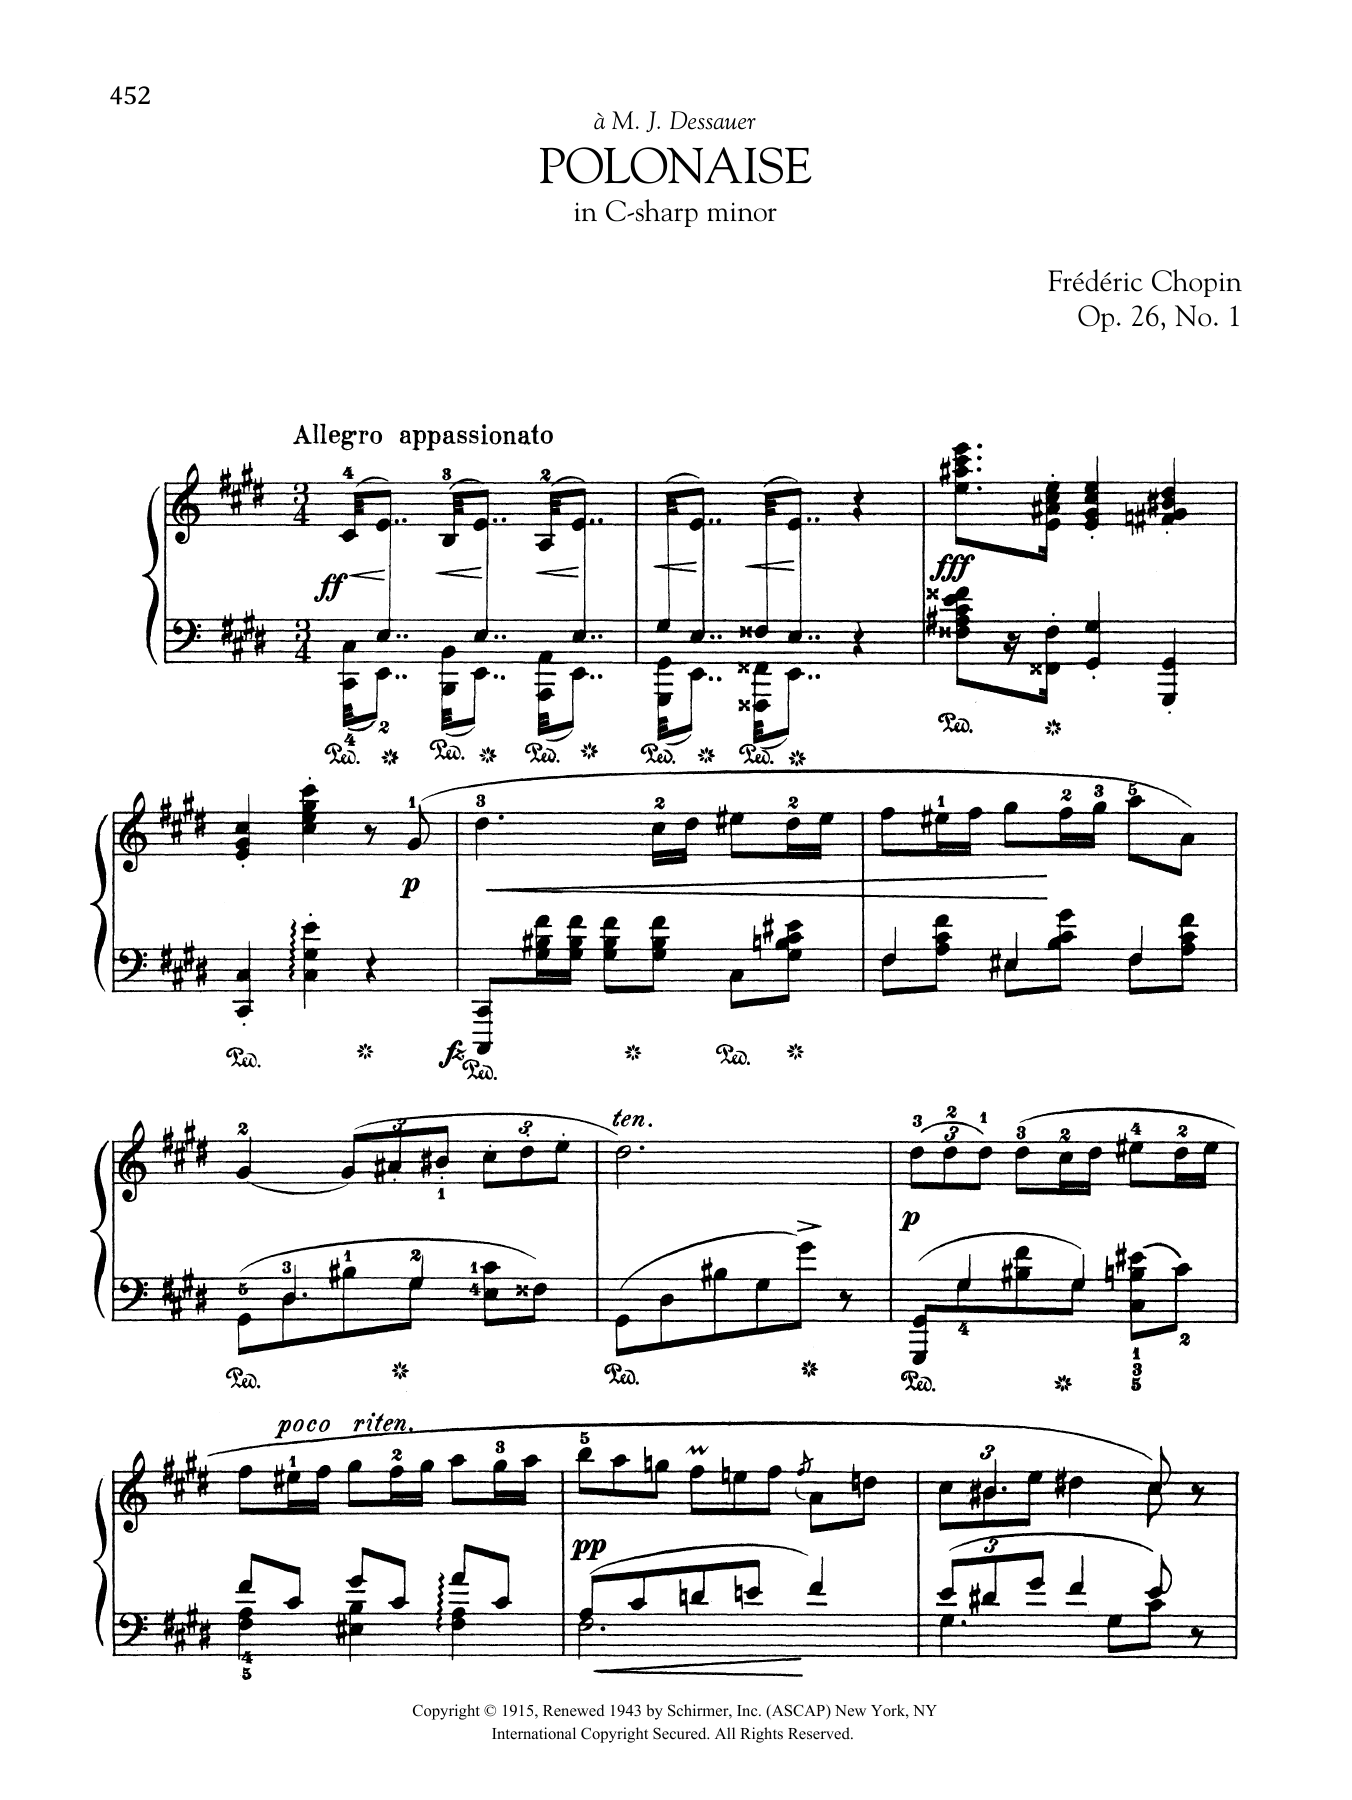 Download Frederic Chopin Polonaise in C-sharp minor, Op. 26, No. Sheet Music